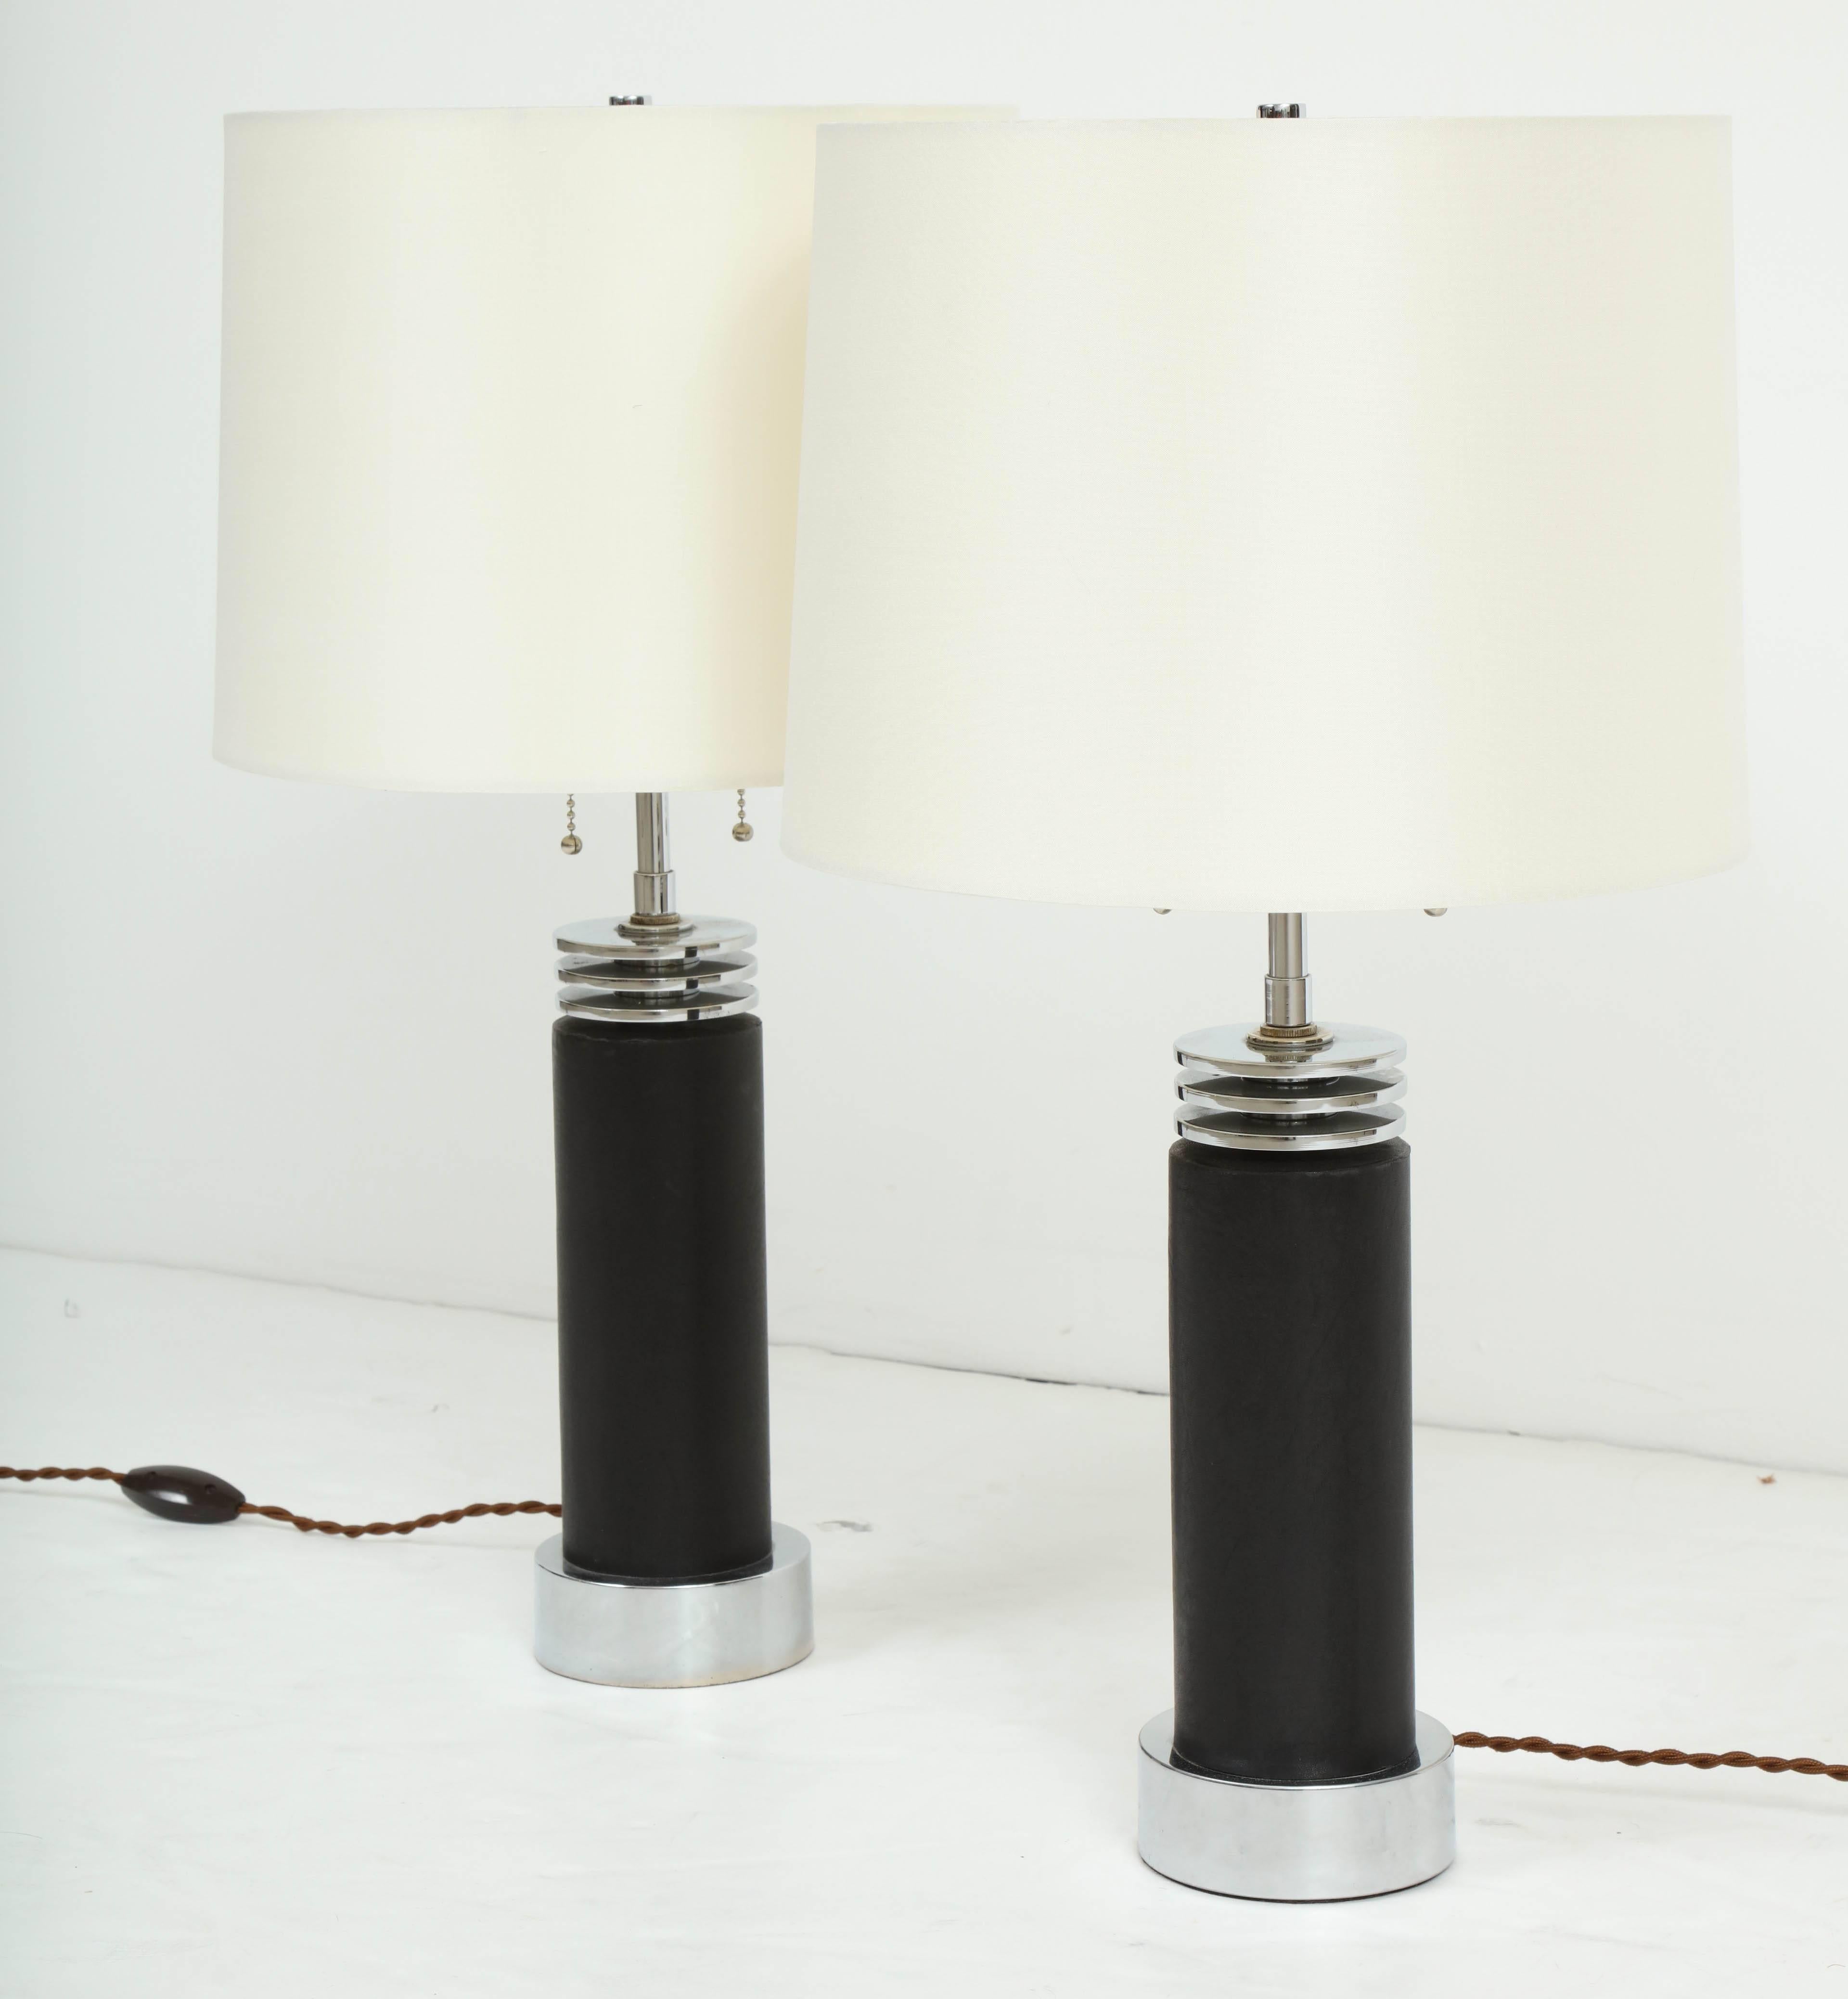 Pair of chrome Art Deco bedside table lamps clad in black goatskin, circa 1940.